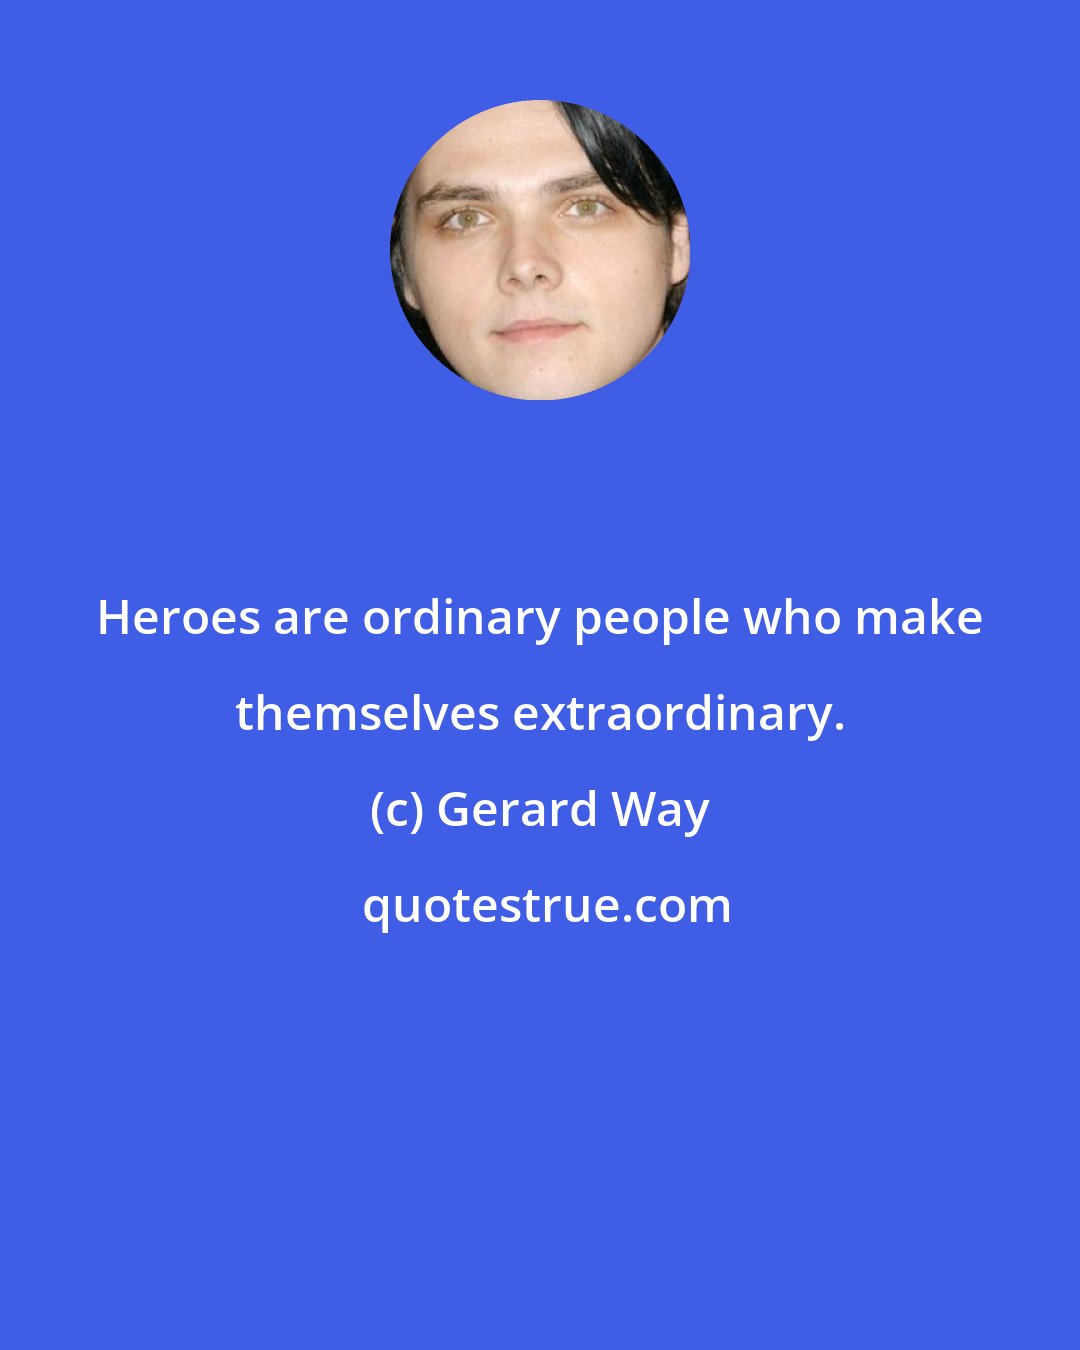 Gerard Way: Heroes are ordinary people who make themselves extraordinary.